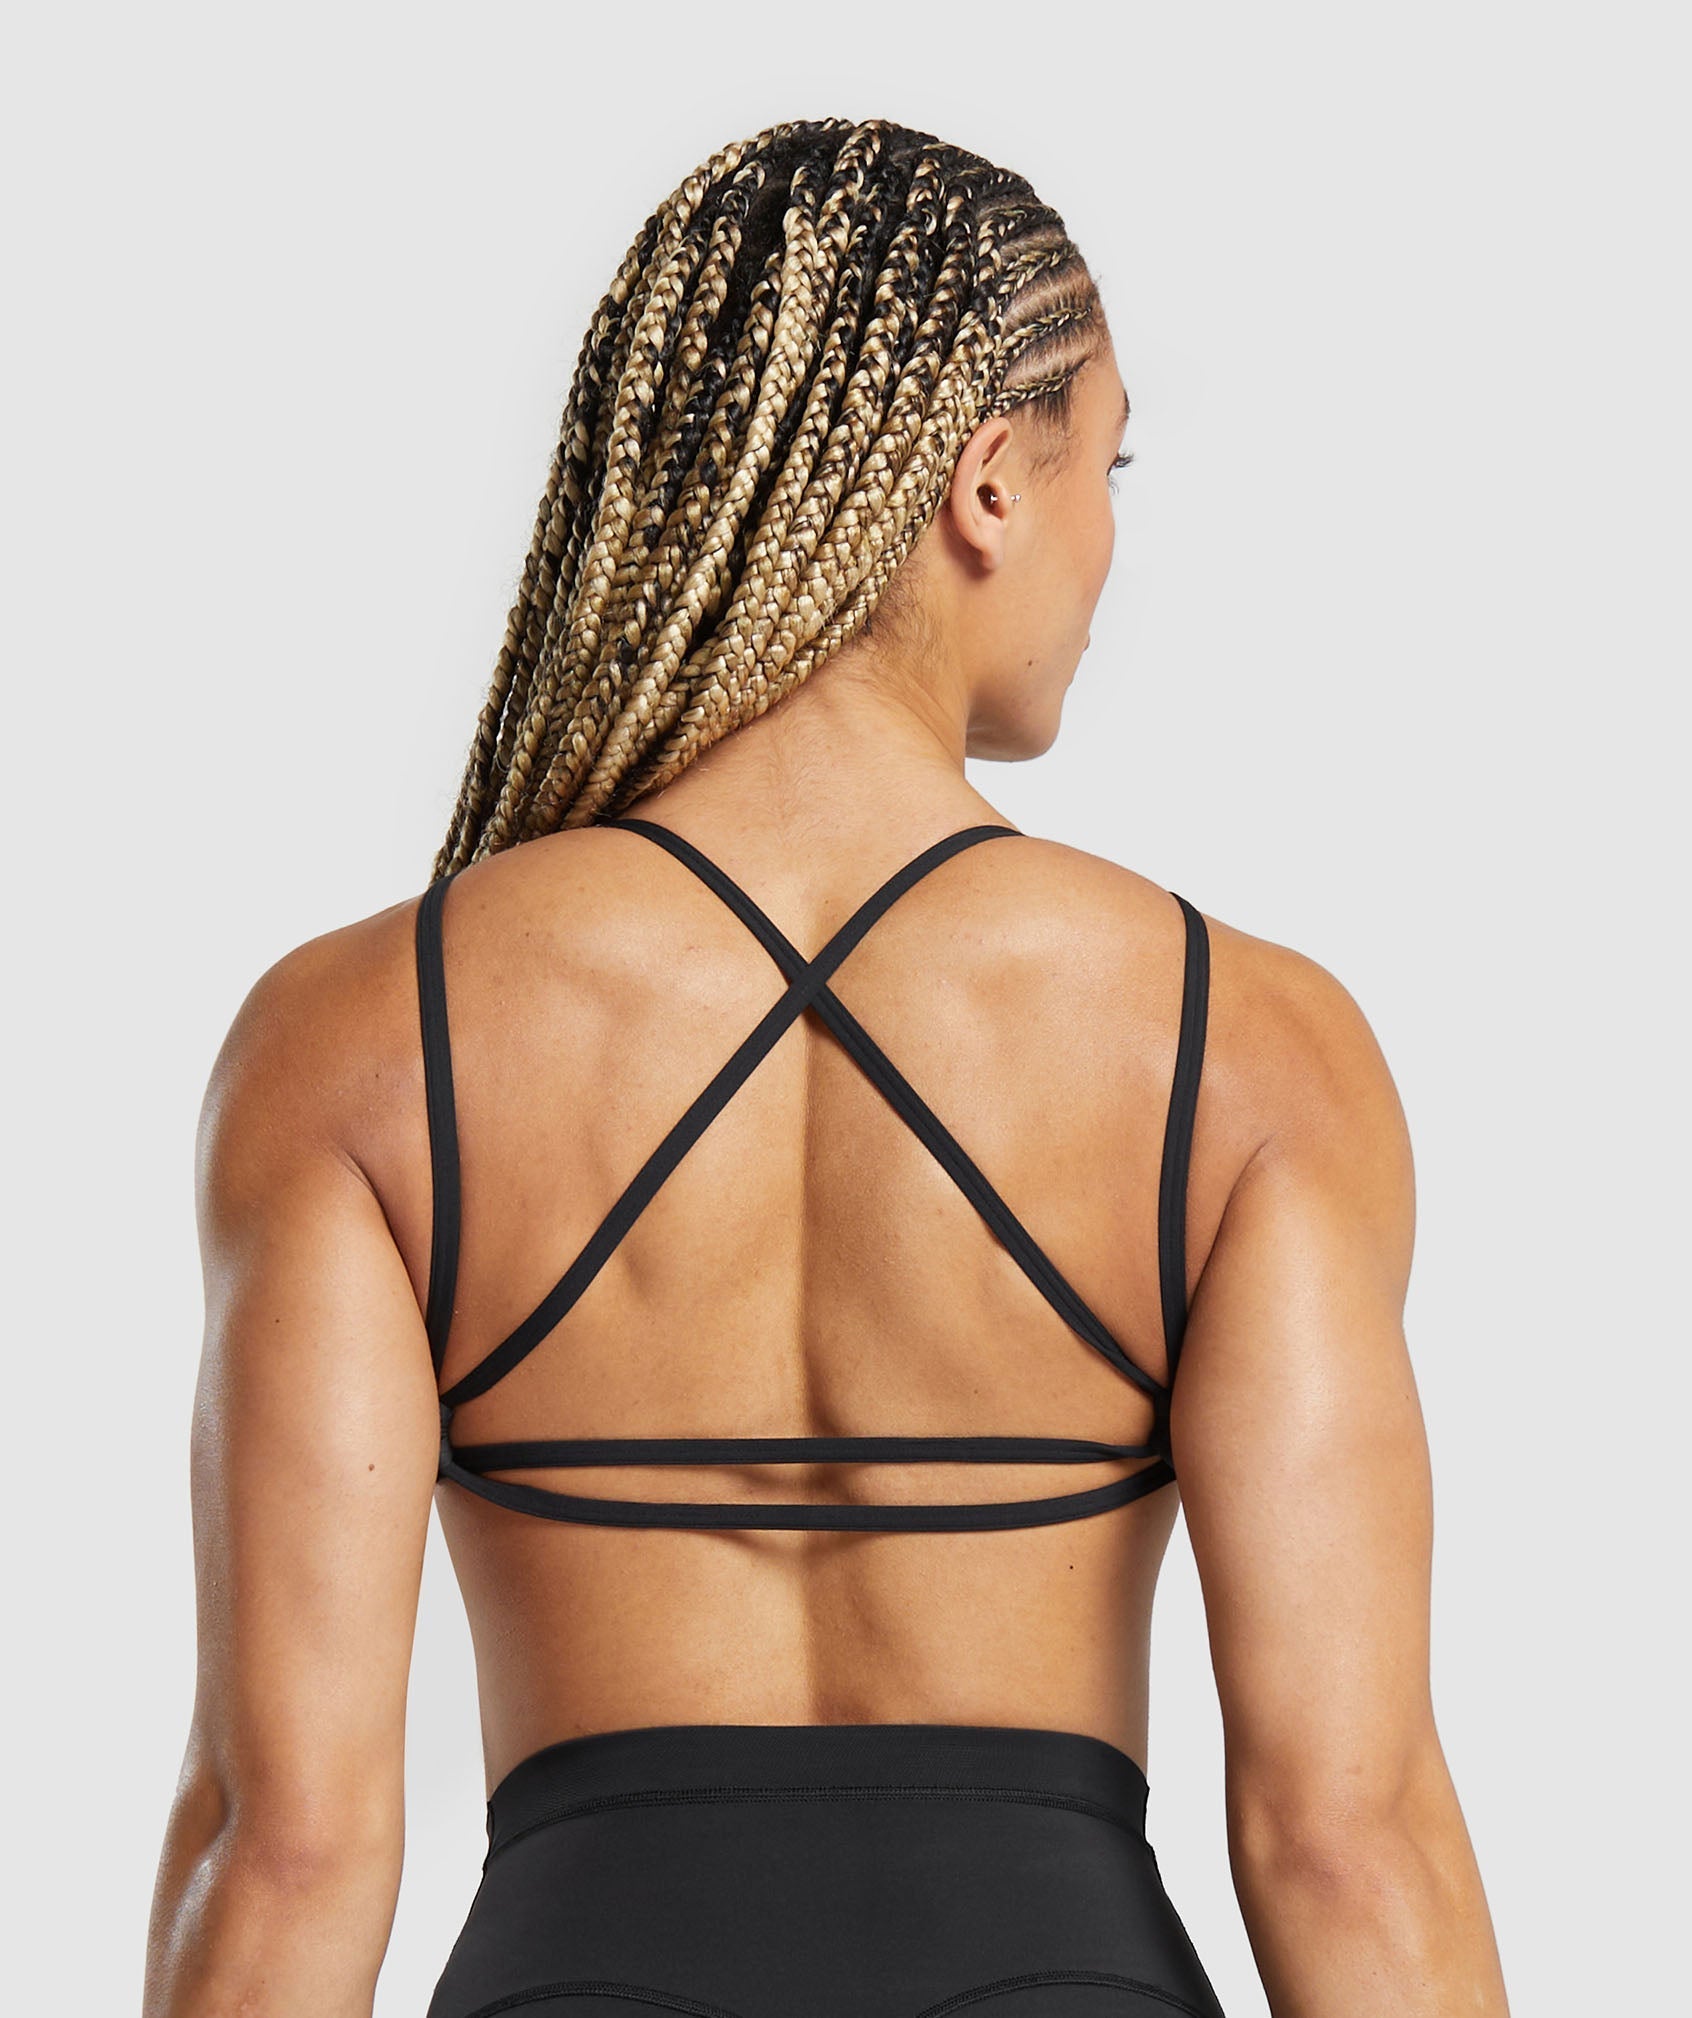  Backless Workout Tops For Women Twist Back Sports